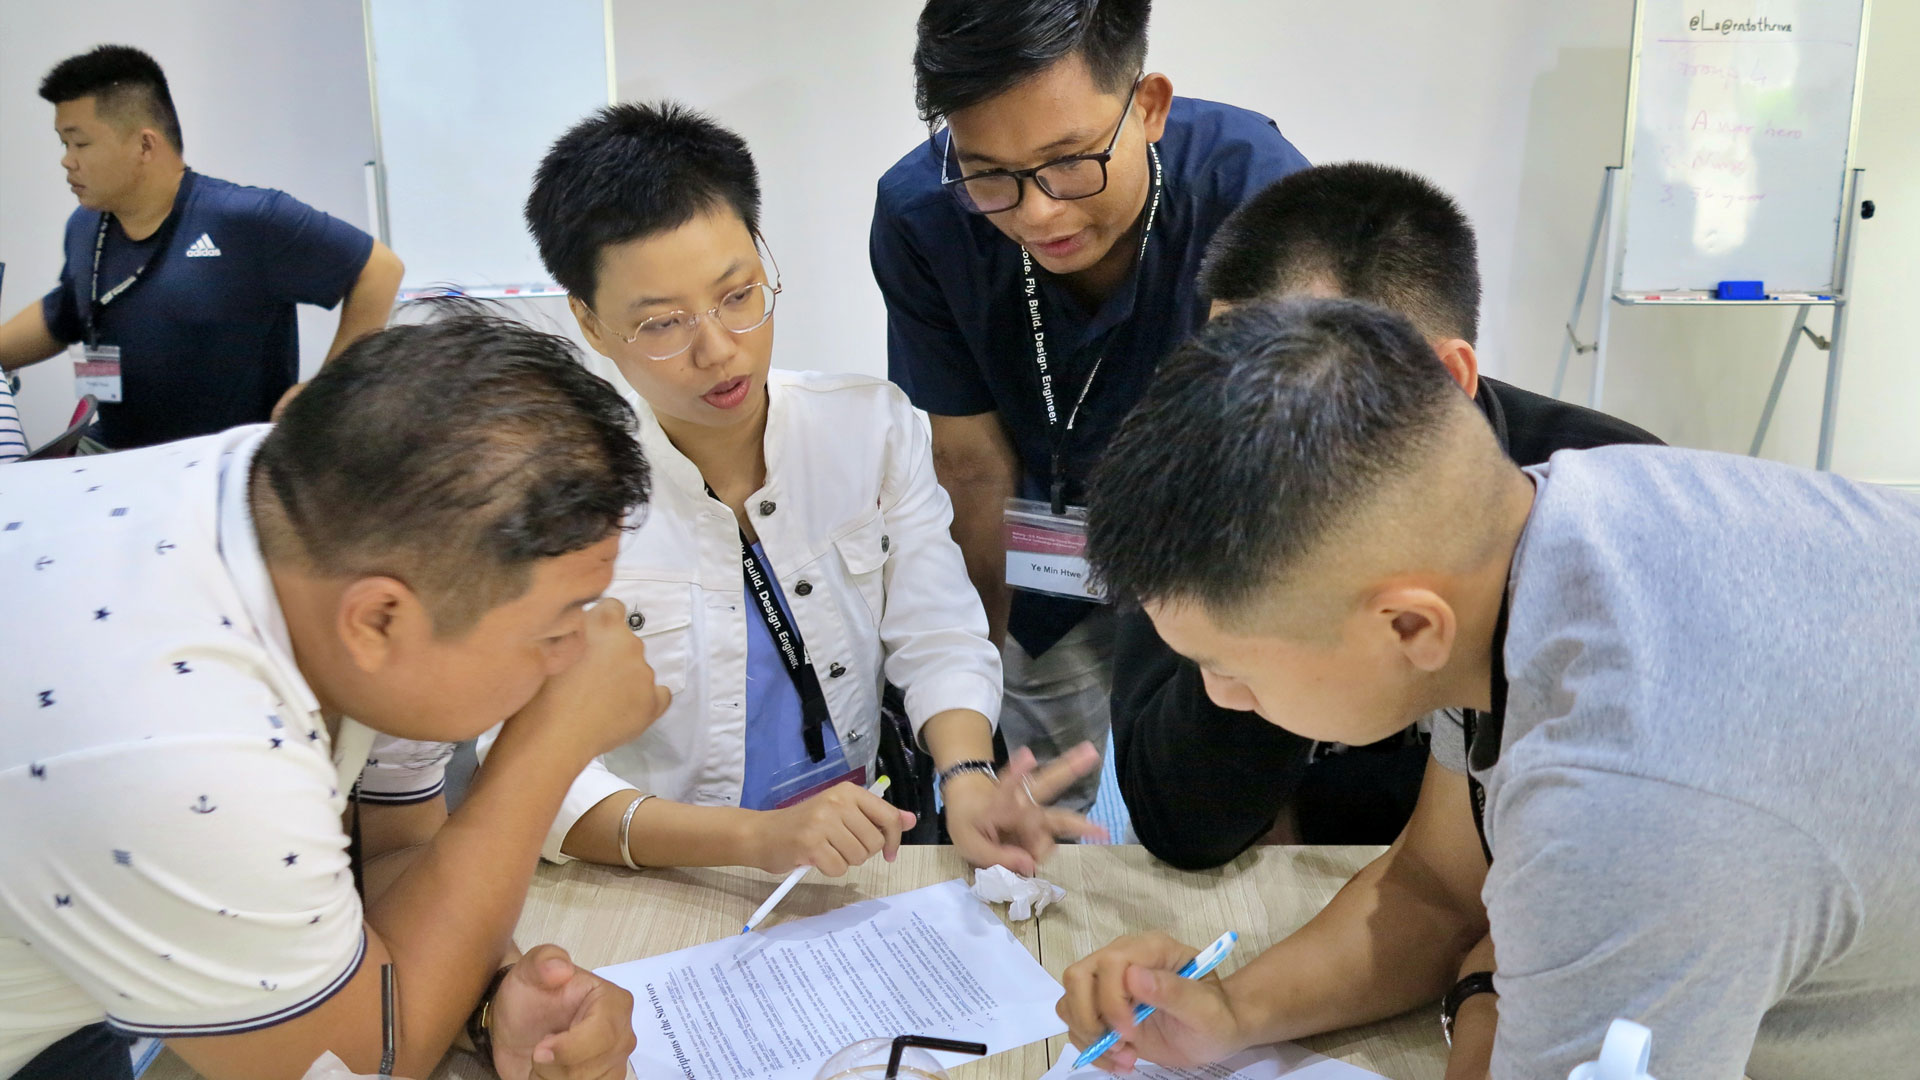 A small group of people from the Mekong-U.S. Partnership Young Scientist Program collaborate at a table and write on a piece of paper.